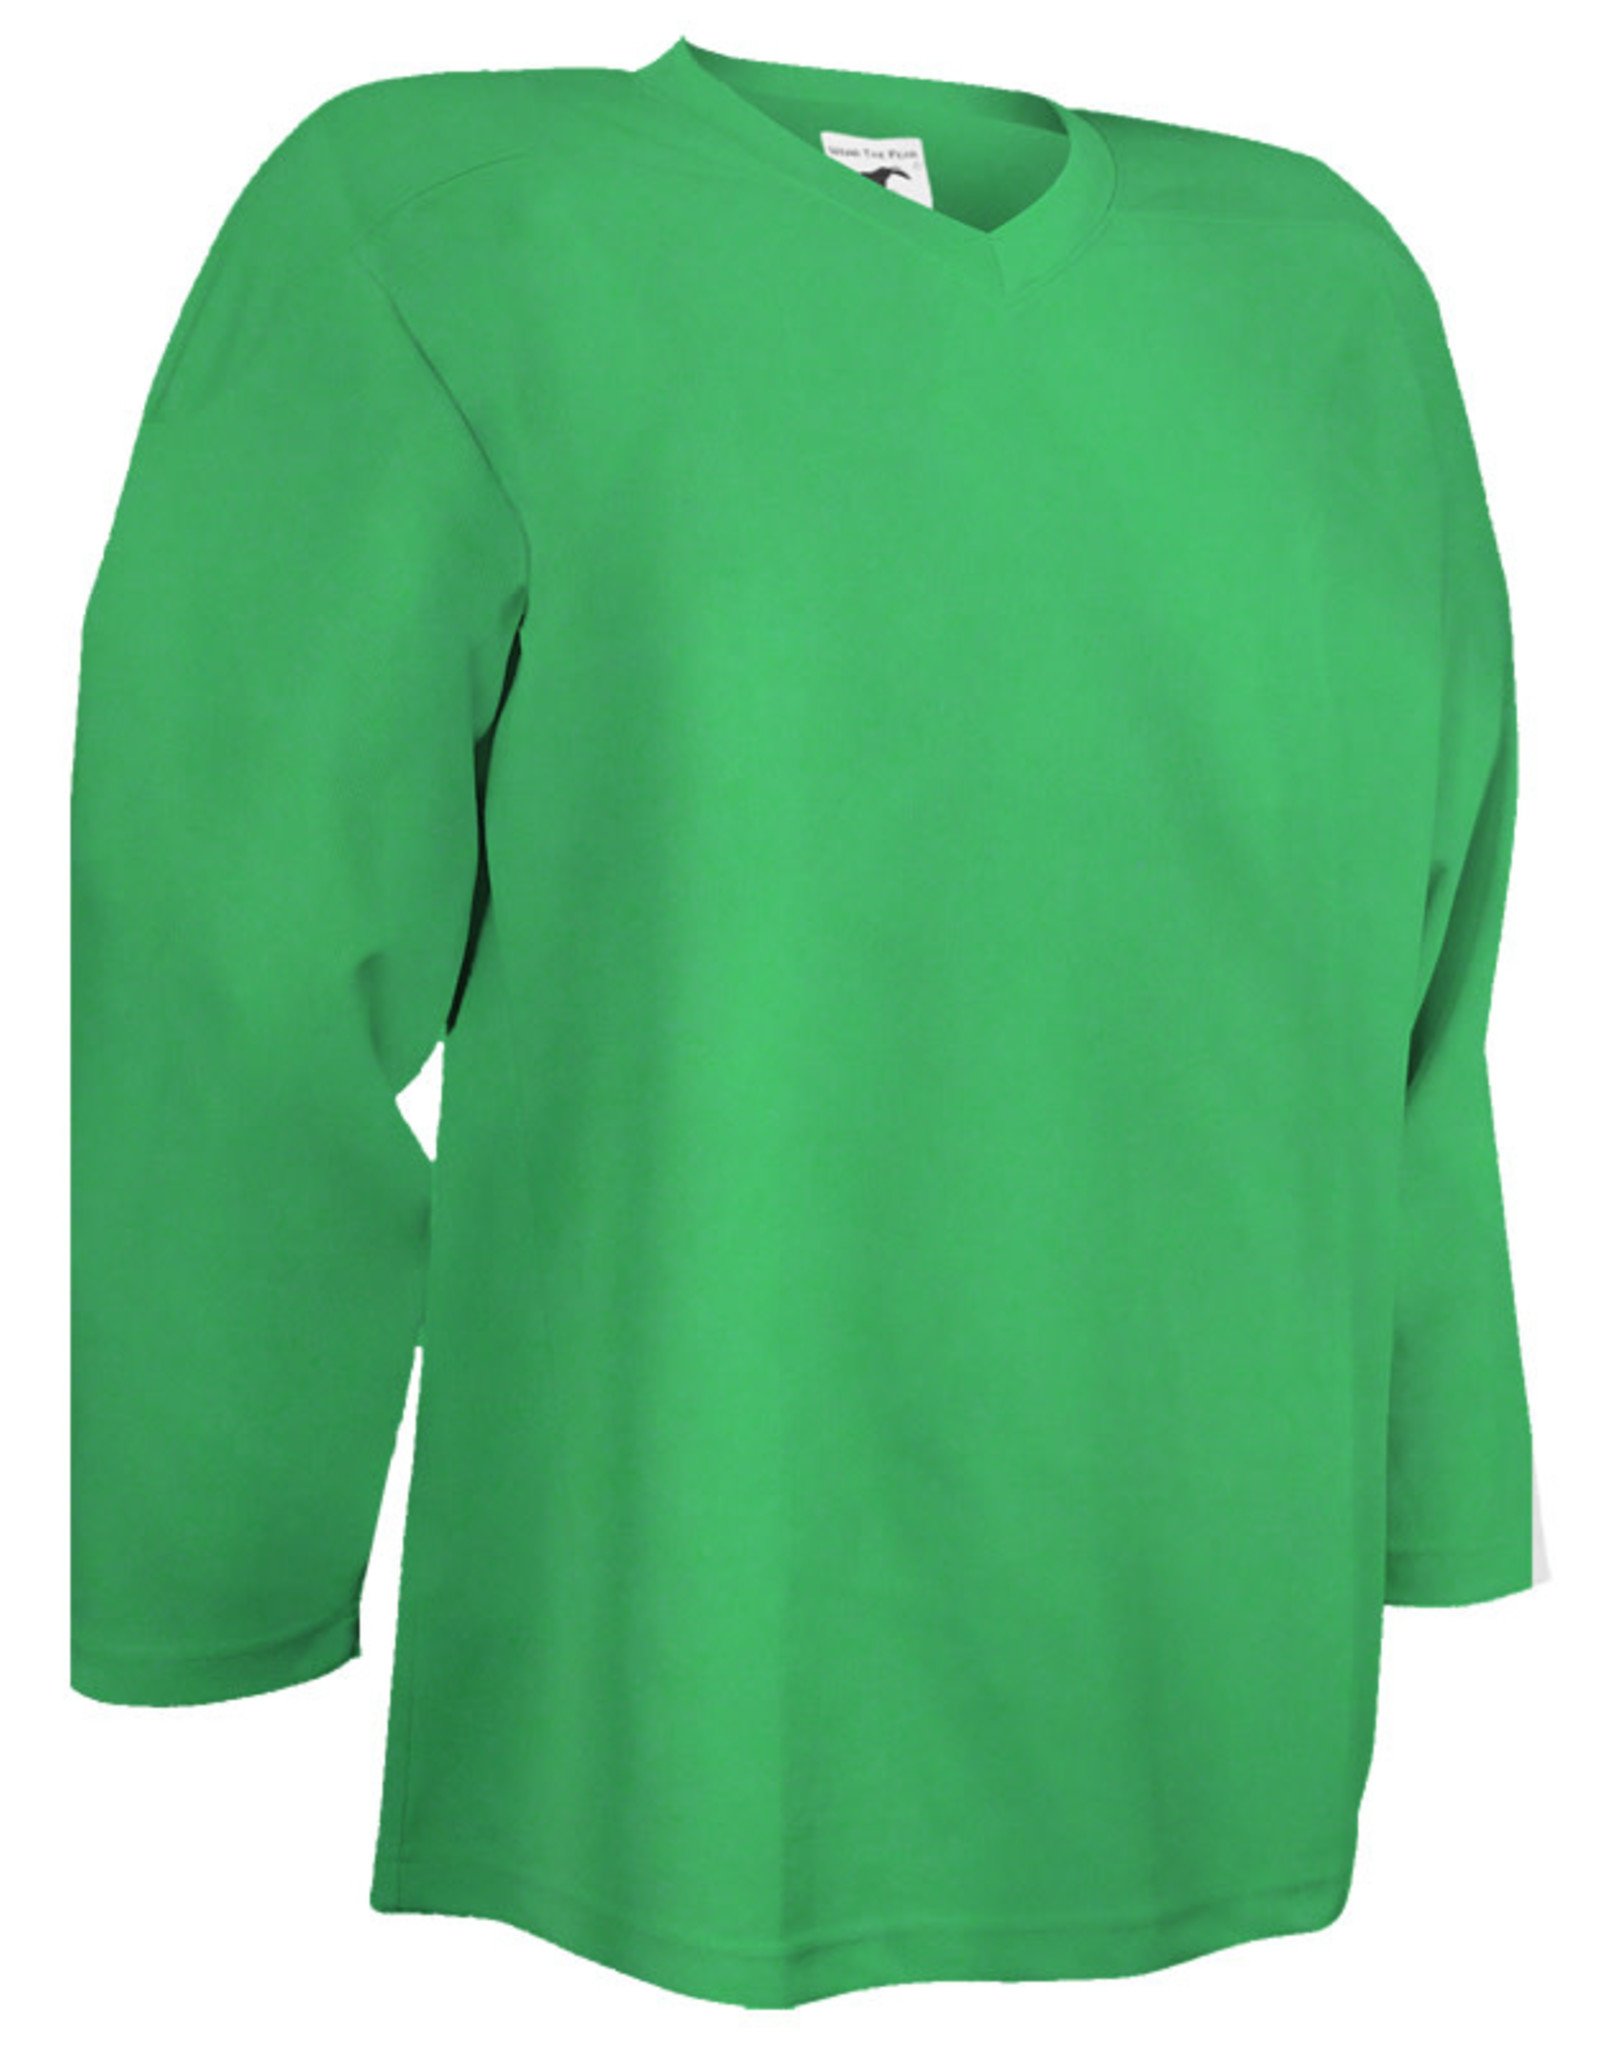 Pear Sox Pear Sox Air Mesh Practice Jersey (YOUTH KELLY GREEN)